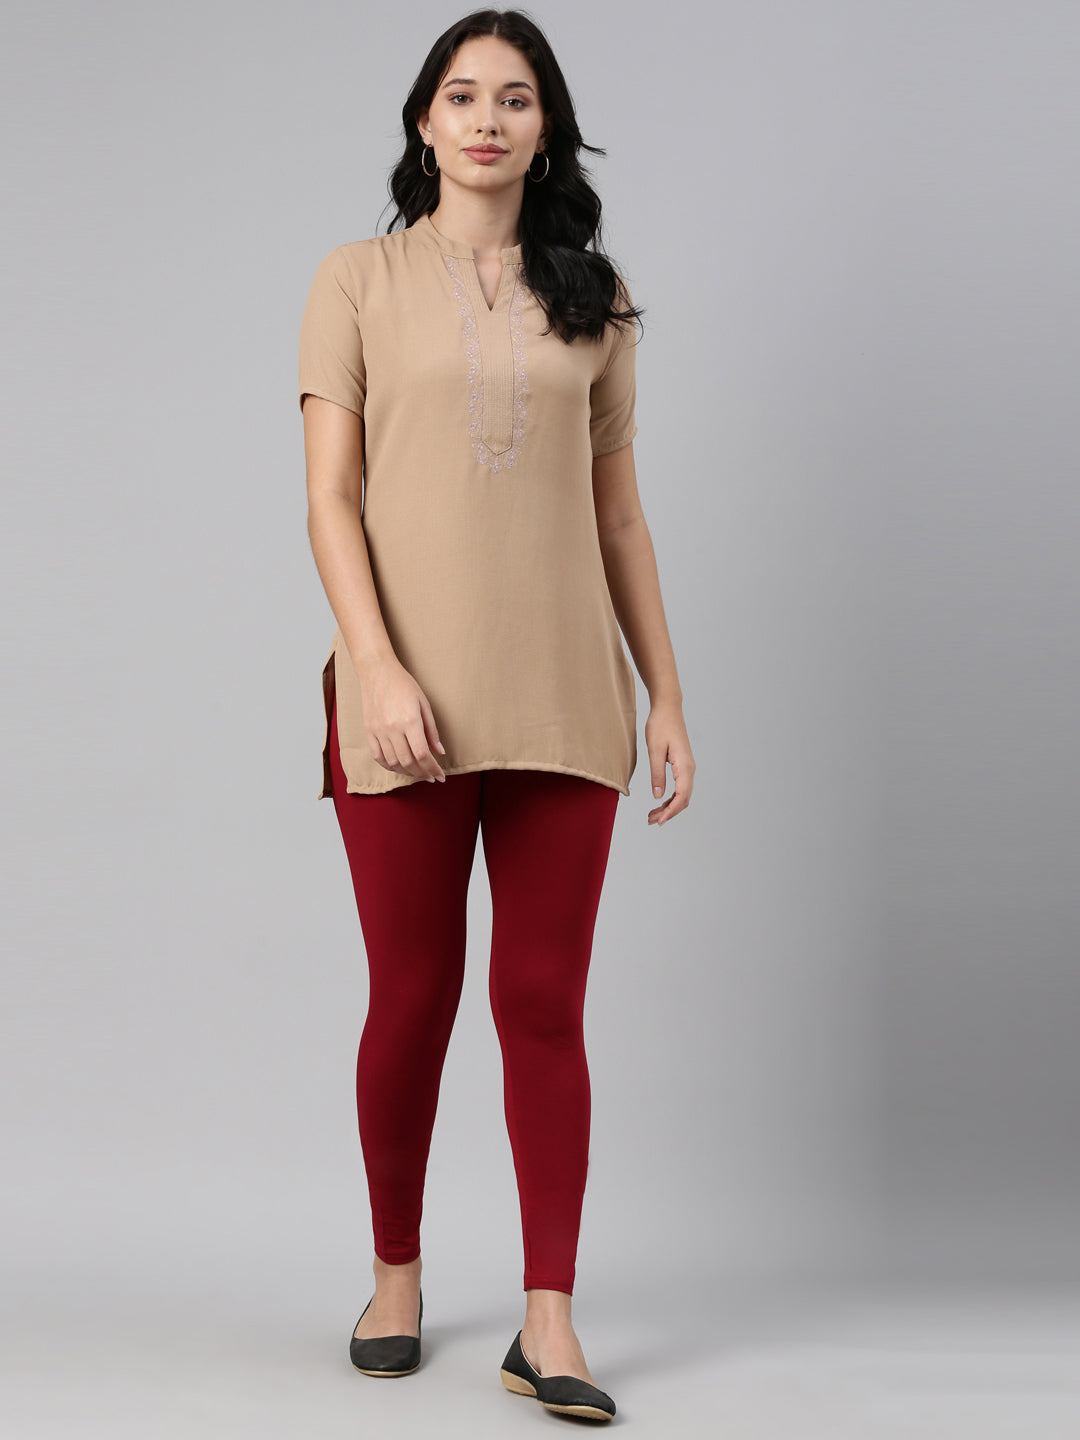 Buy SOFT COLORS Ankle Length Leggings for Women Sizes: Extra Small